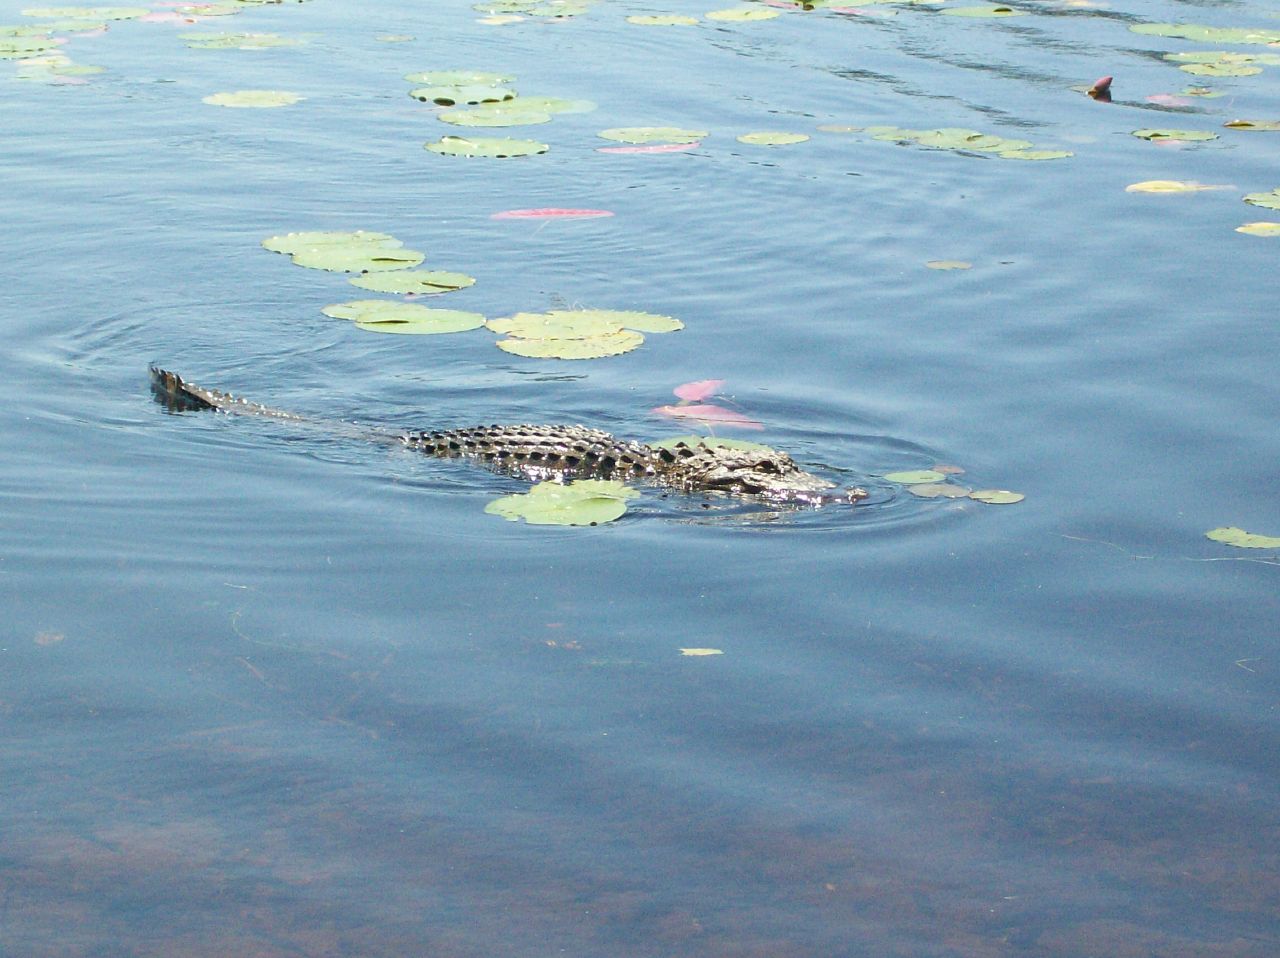 there is a large alligator in the water